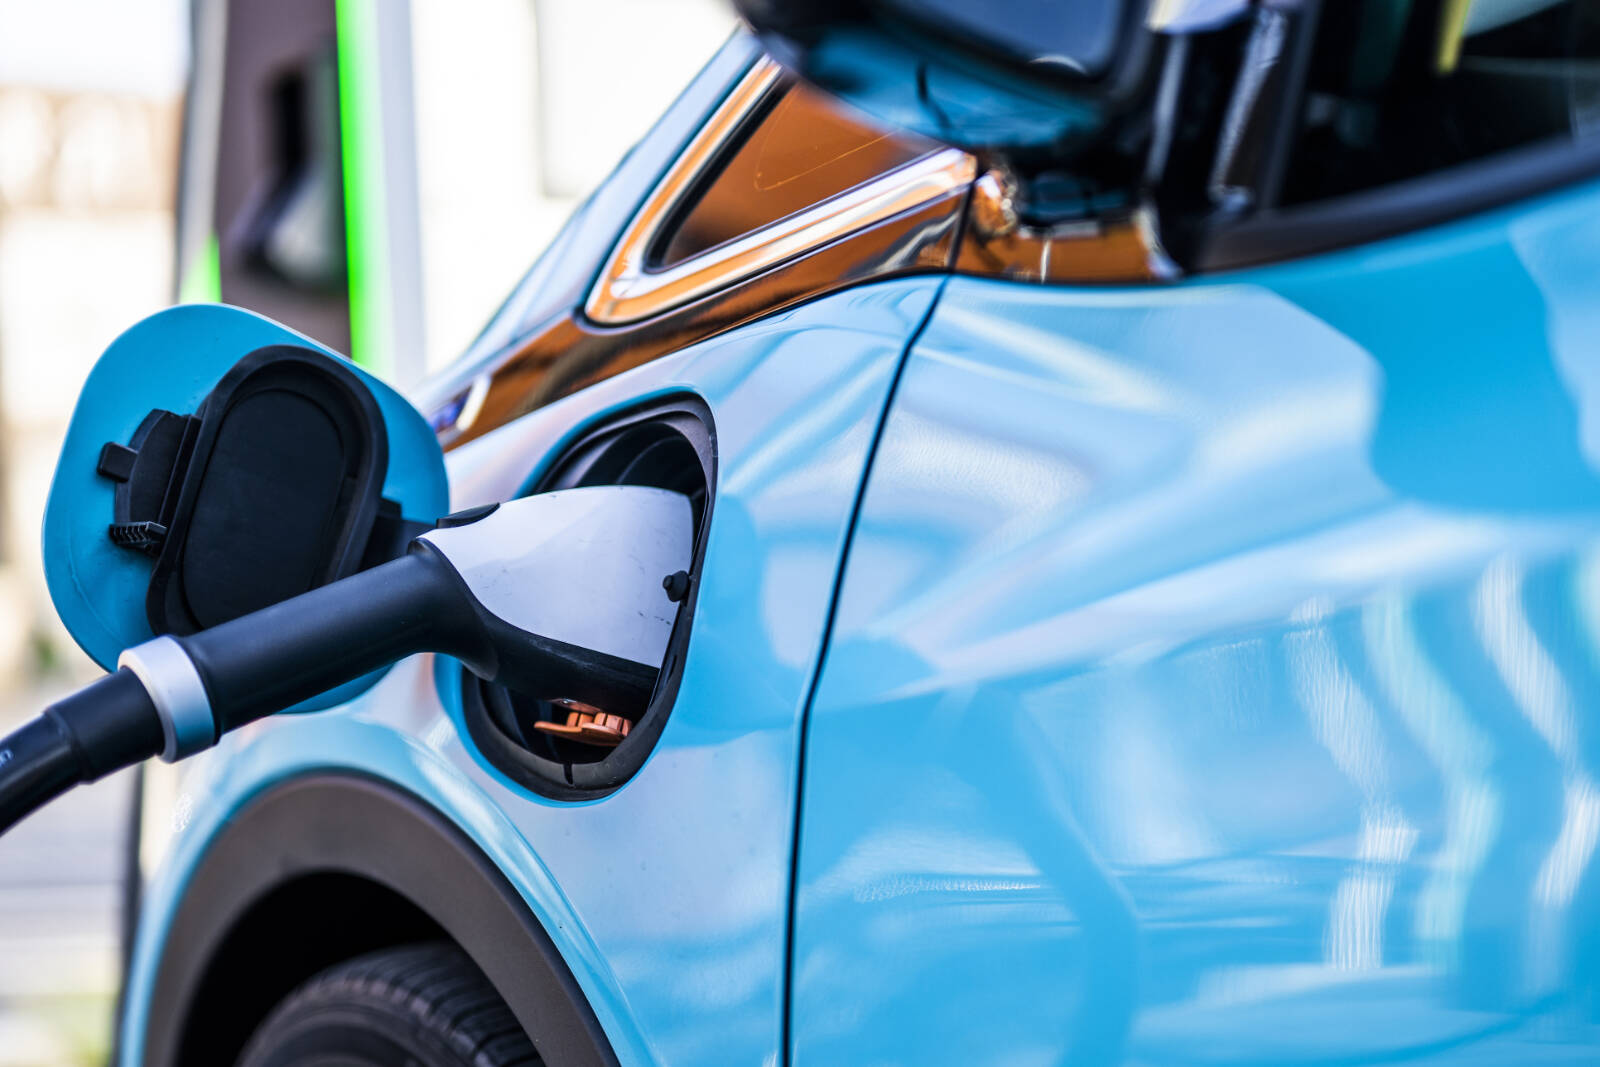 In 2021, British Columbia continued to lead Canada in terms of ZEV share, which rose to 14.6 per cent of the market for the first half of 2022.